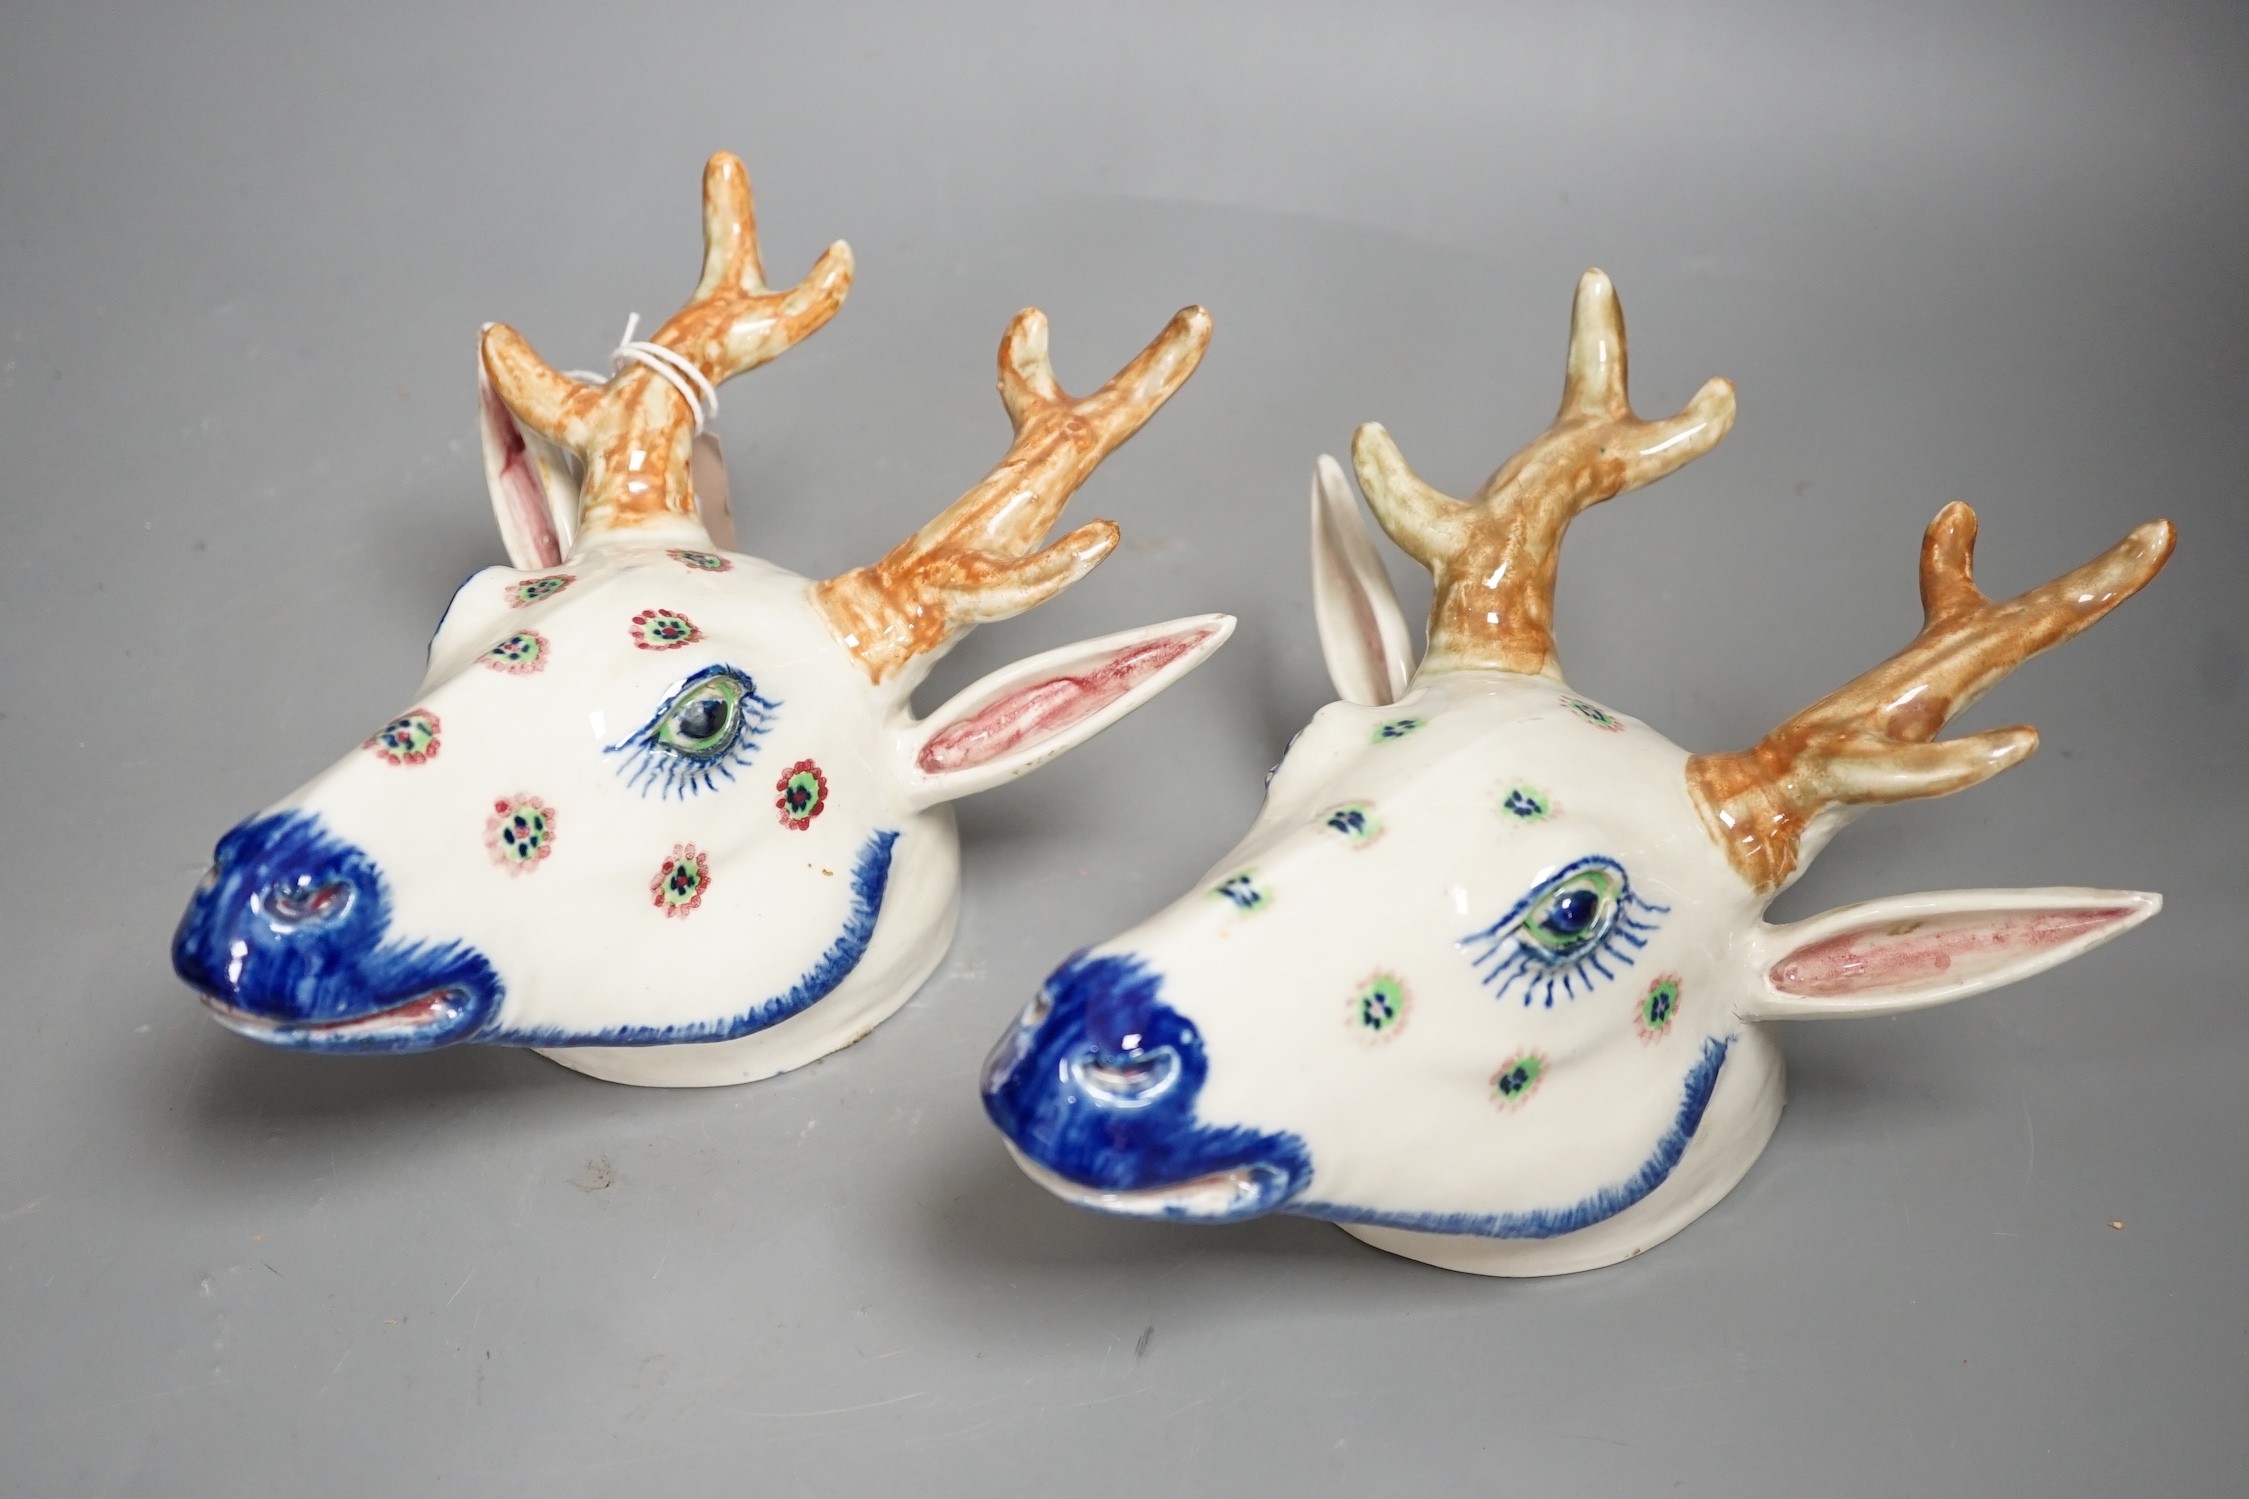 Two Continental pottery stag head wall pockets, 22cms high